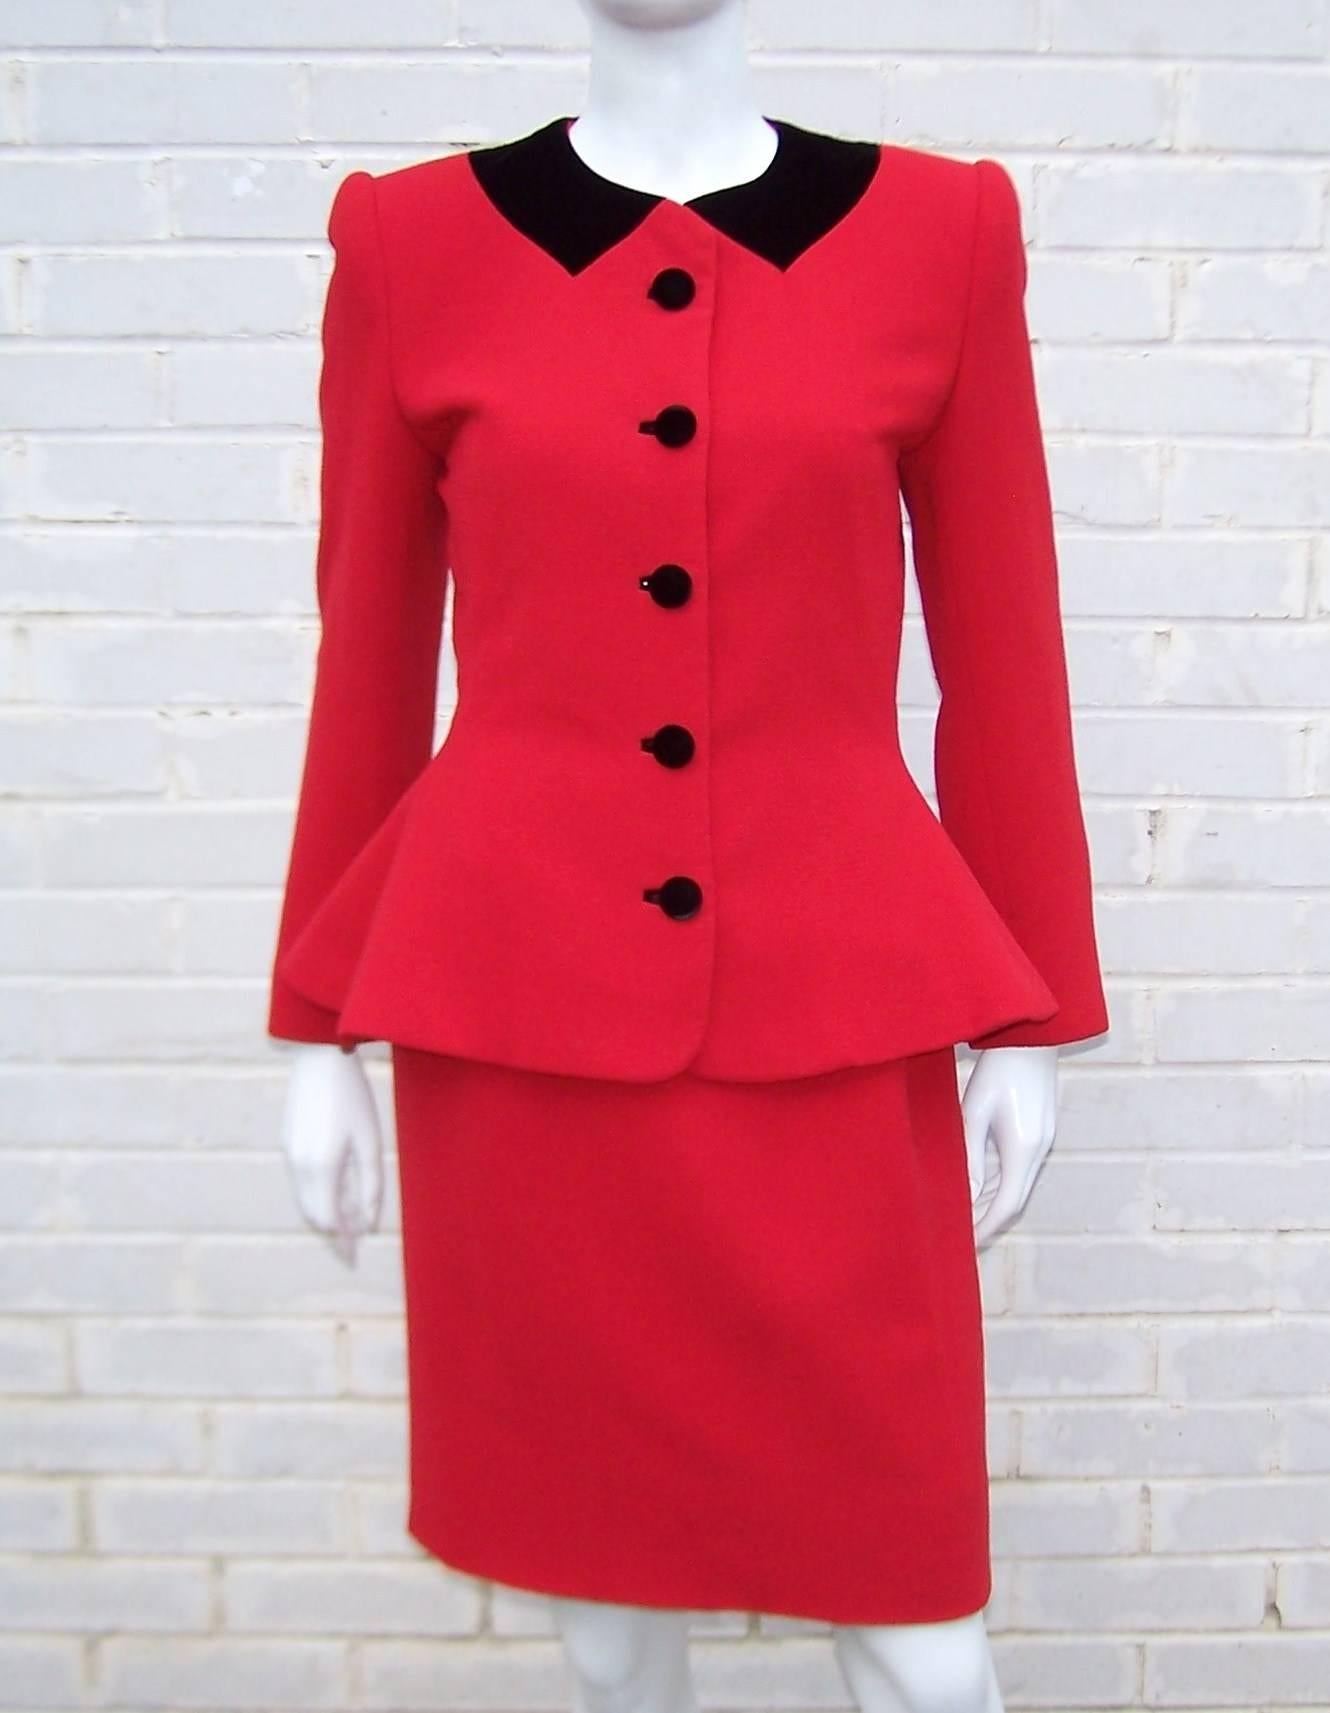 This sweet suit has an ultra feminine shape and details to please.  The vibrant red wool crepe is accented with a trompe l'oeil black velvet collar and large buttons.  Strong shoulders and a narrow torso yield to a peplum flounce that is flattering